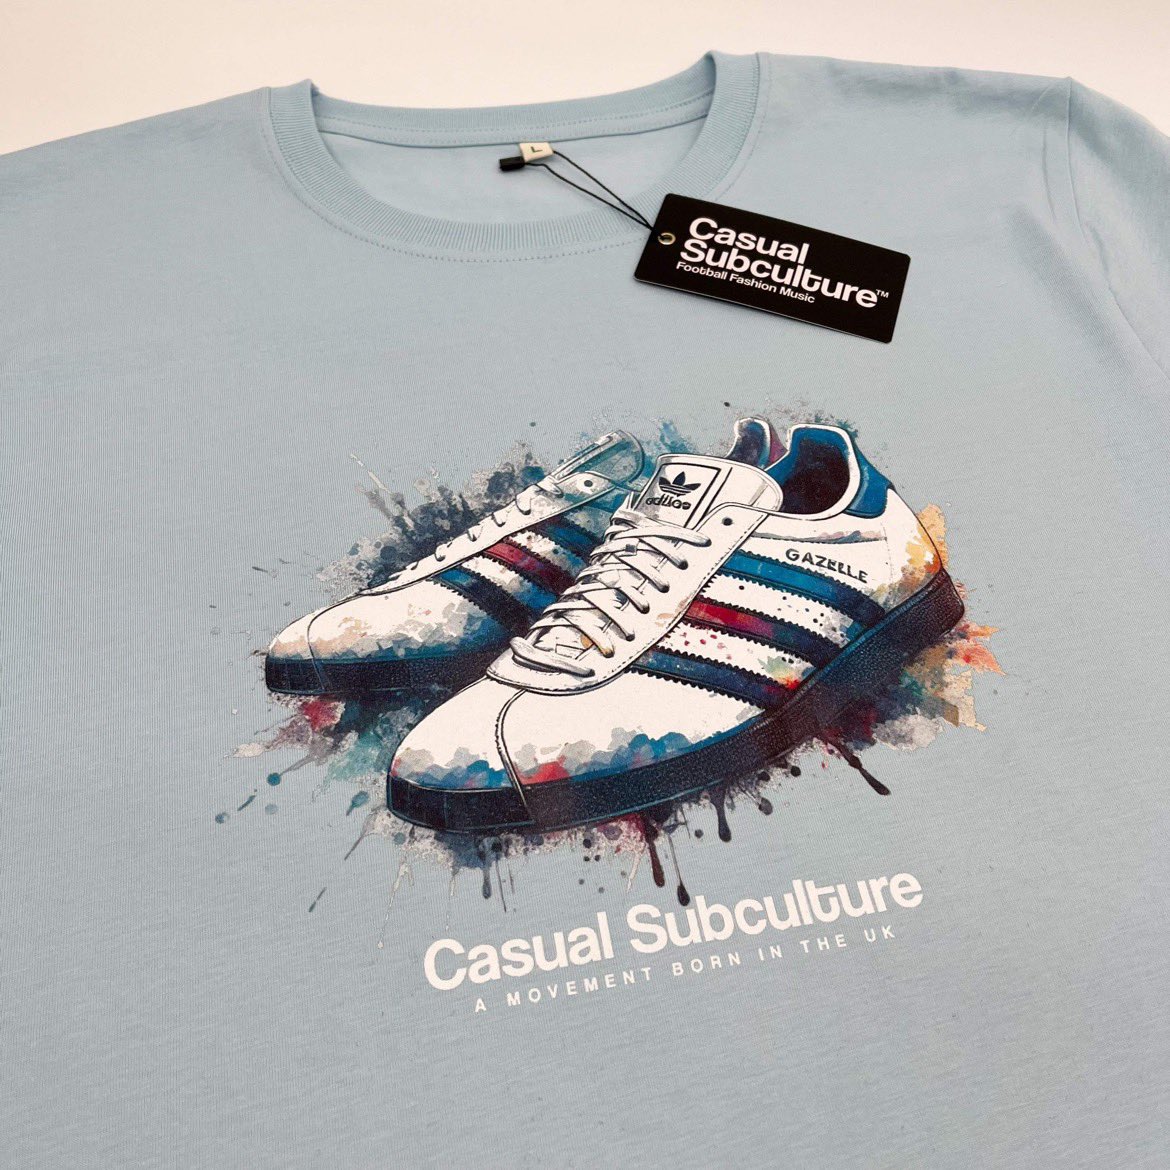 G A Z E L L E T S H I R T S Created in this unique watercolour style art this design is available to order in 5 different colours here ⬇️ 🛒 - tinyurl.com/yyemdpkt 👕 Sizes (Small - 2XL) Football 🔸 Fashion 🔸 Music